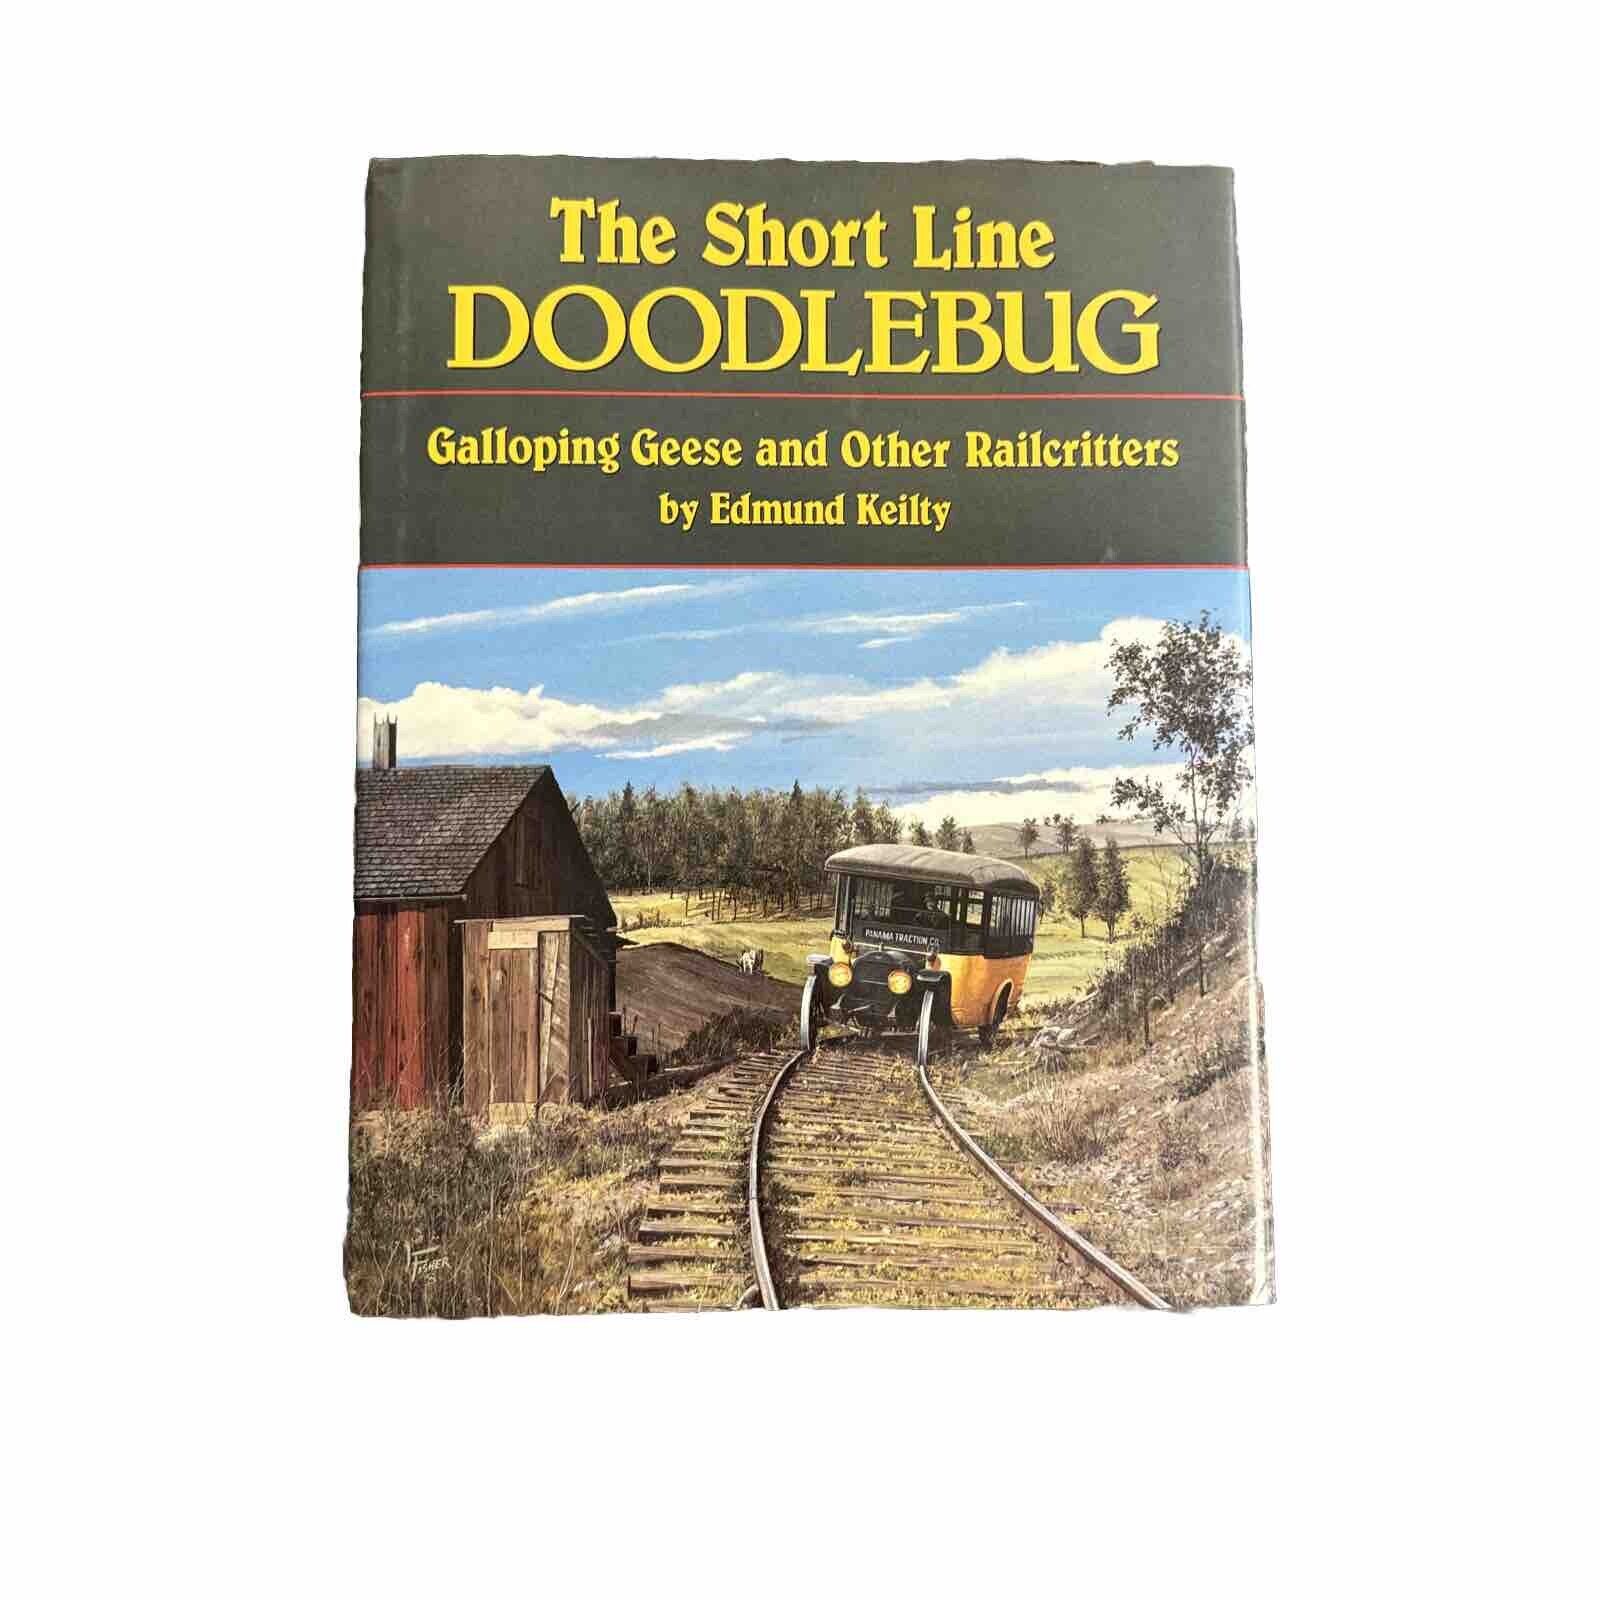 The Short Line Doodlebug Galloping Geese and Other Railcritters by Edmund Keilty